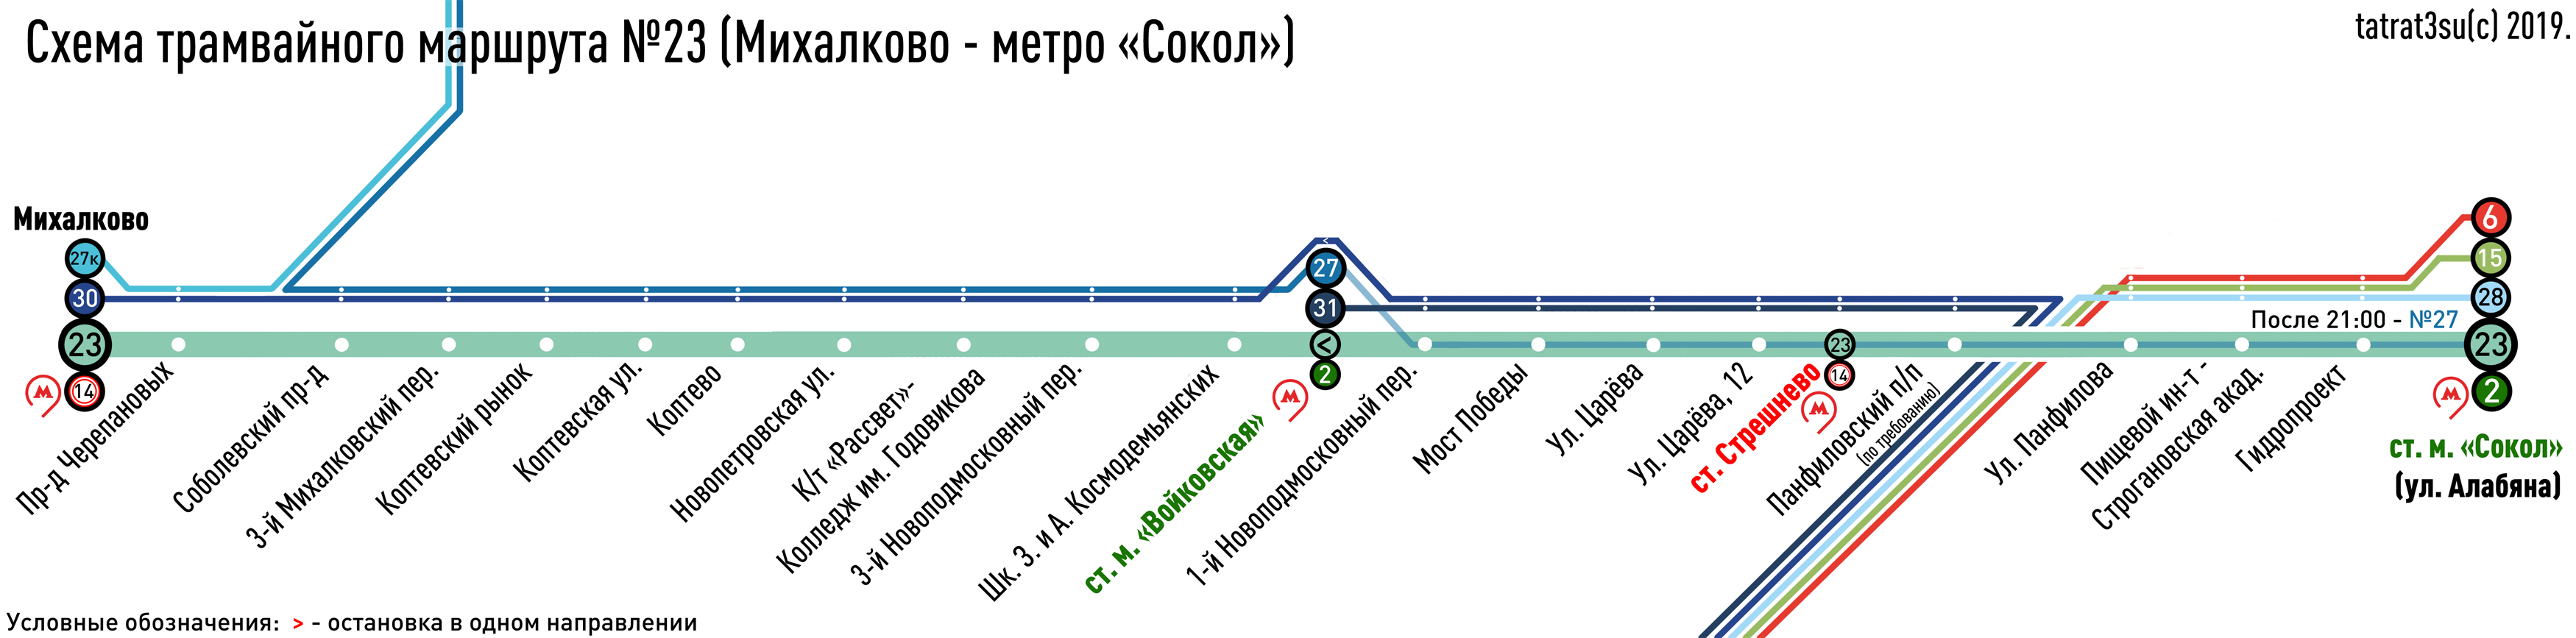 Moscow — Individual Route Maps